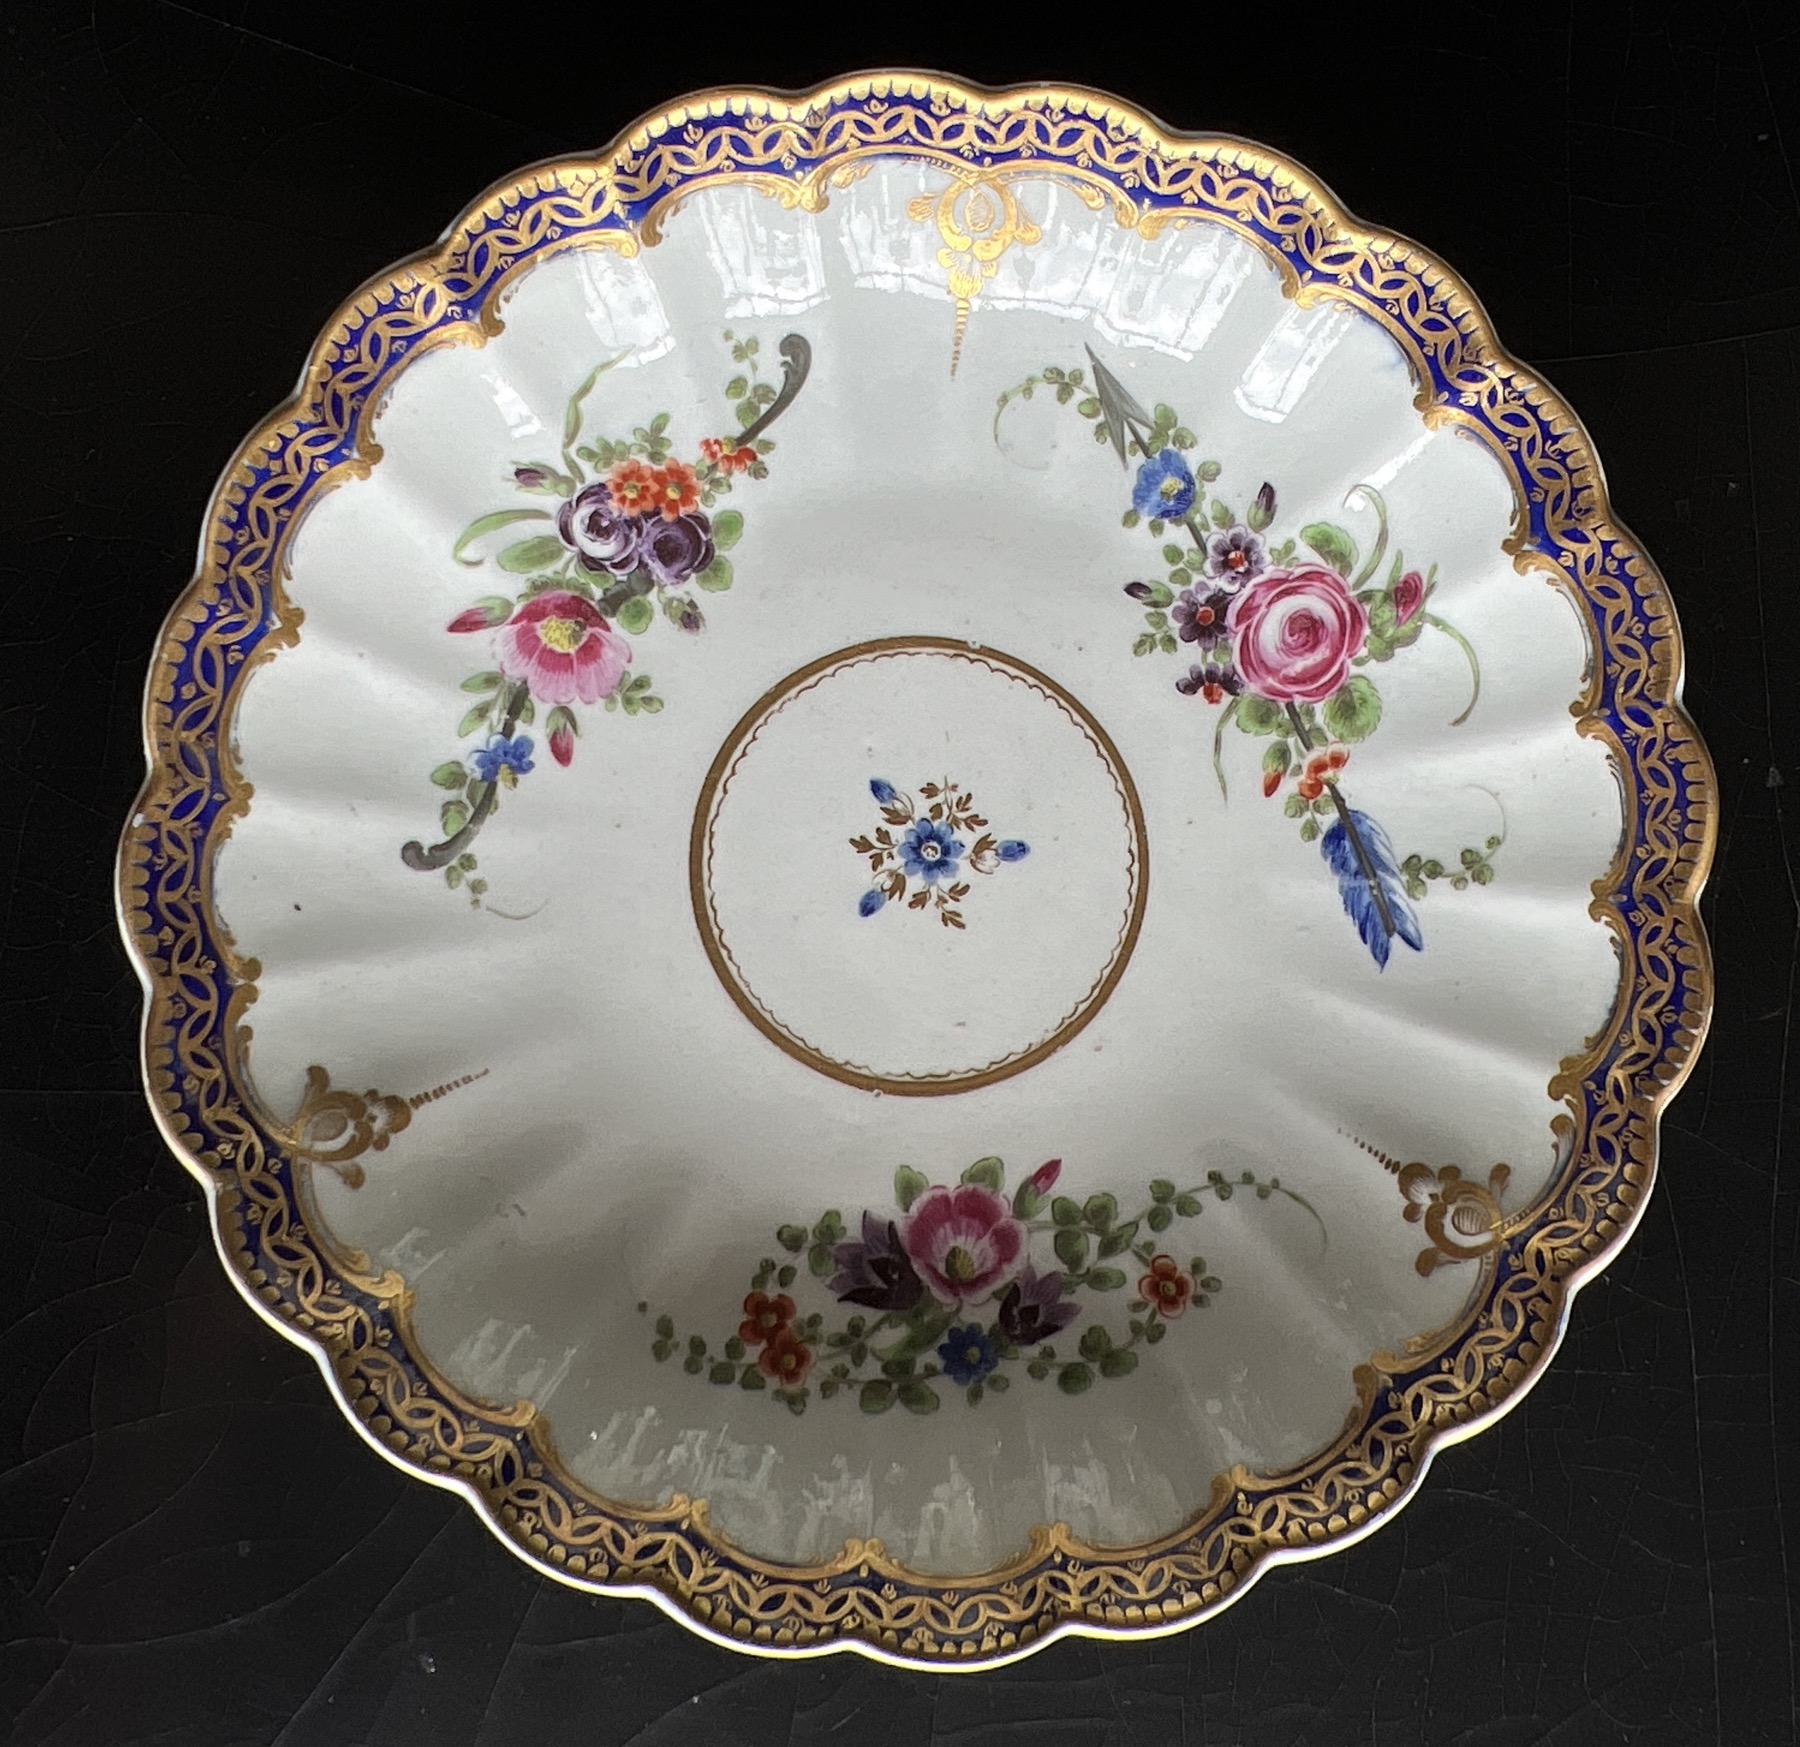 Worcester 'Marriage' pattern, c. 17